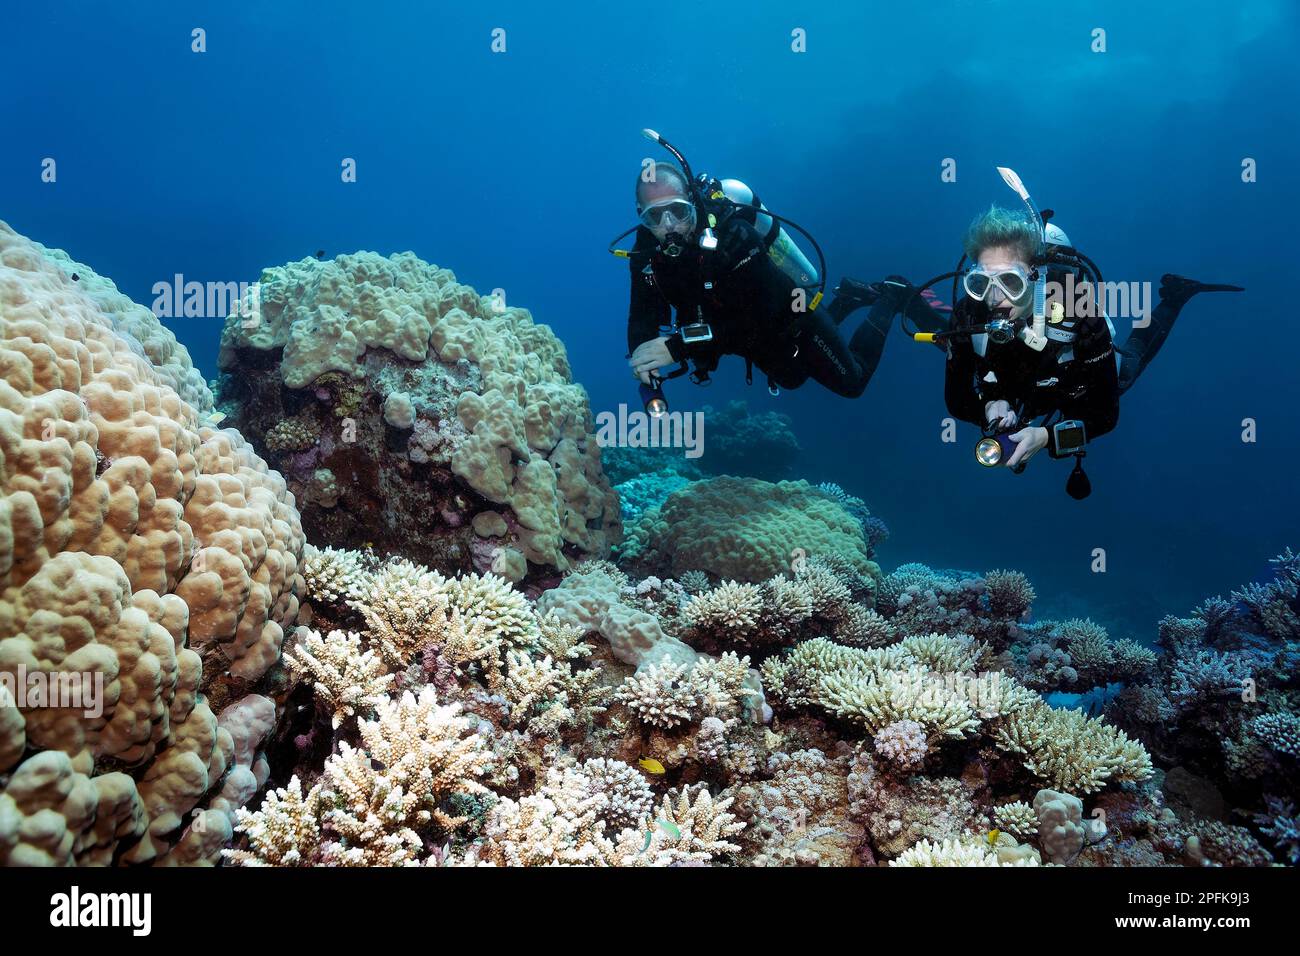 Diver, diving, two, looking at, diving over intact, intact coral reef, various Acropora stony corals (Acropora), Red Sea, Hurghada, Egypt Stock Photo